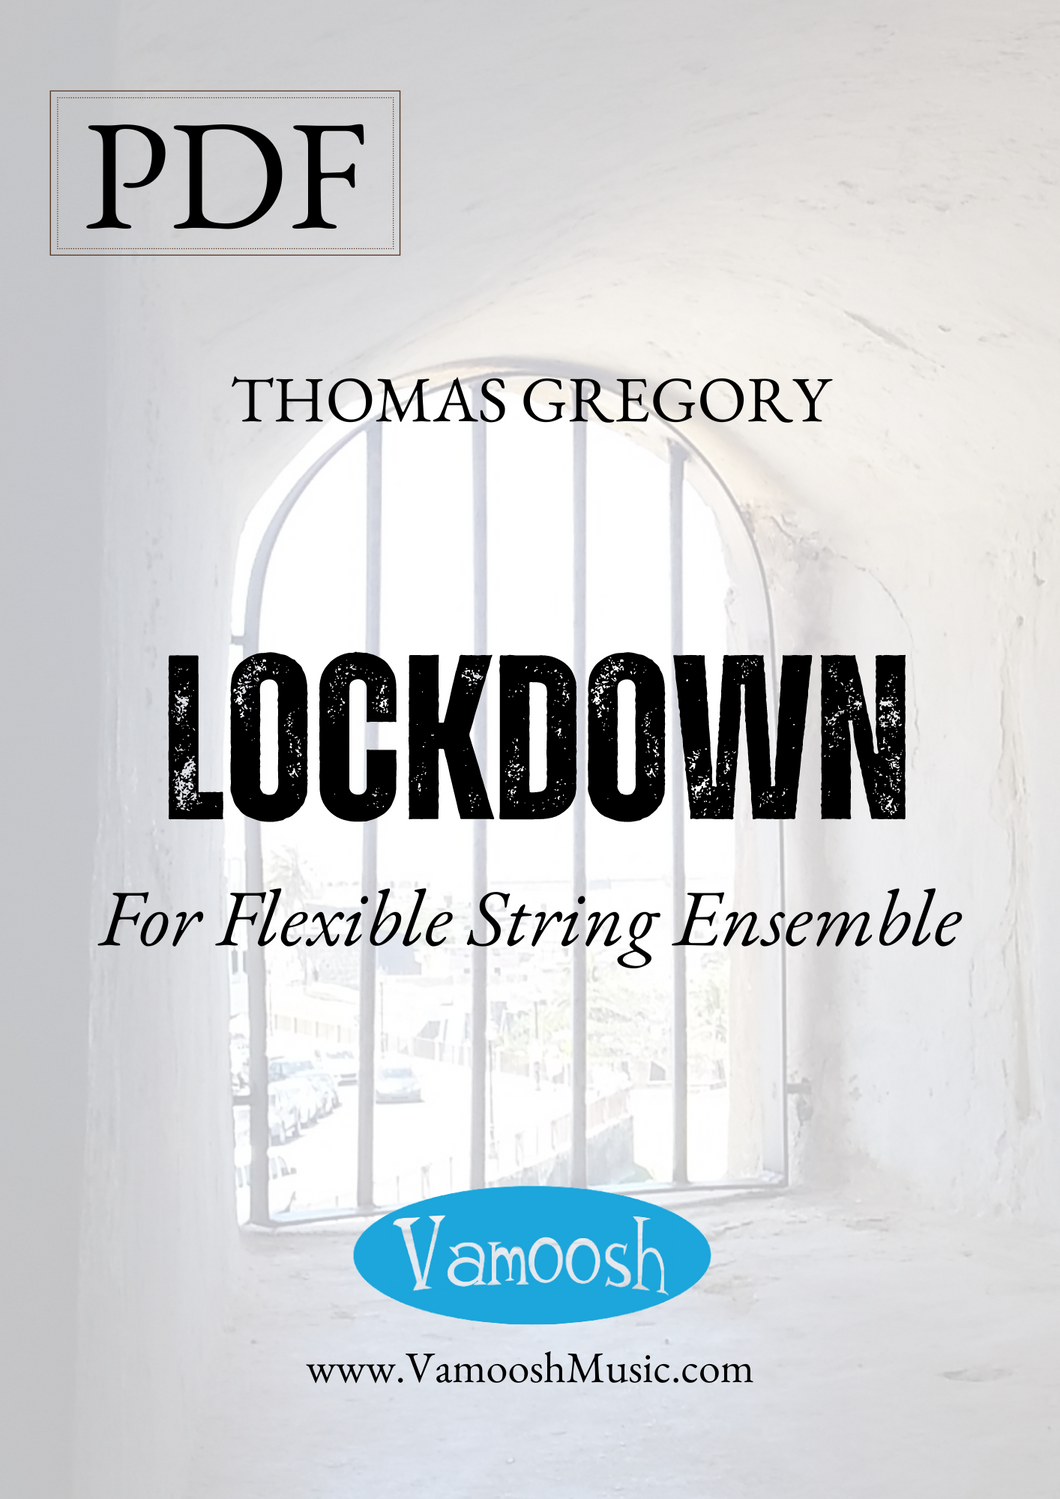 Lockdown by Thomas Gregory